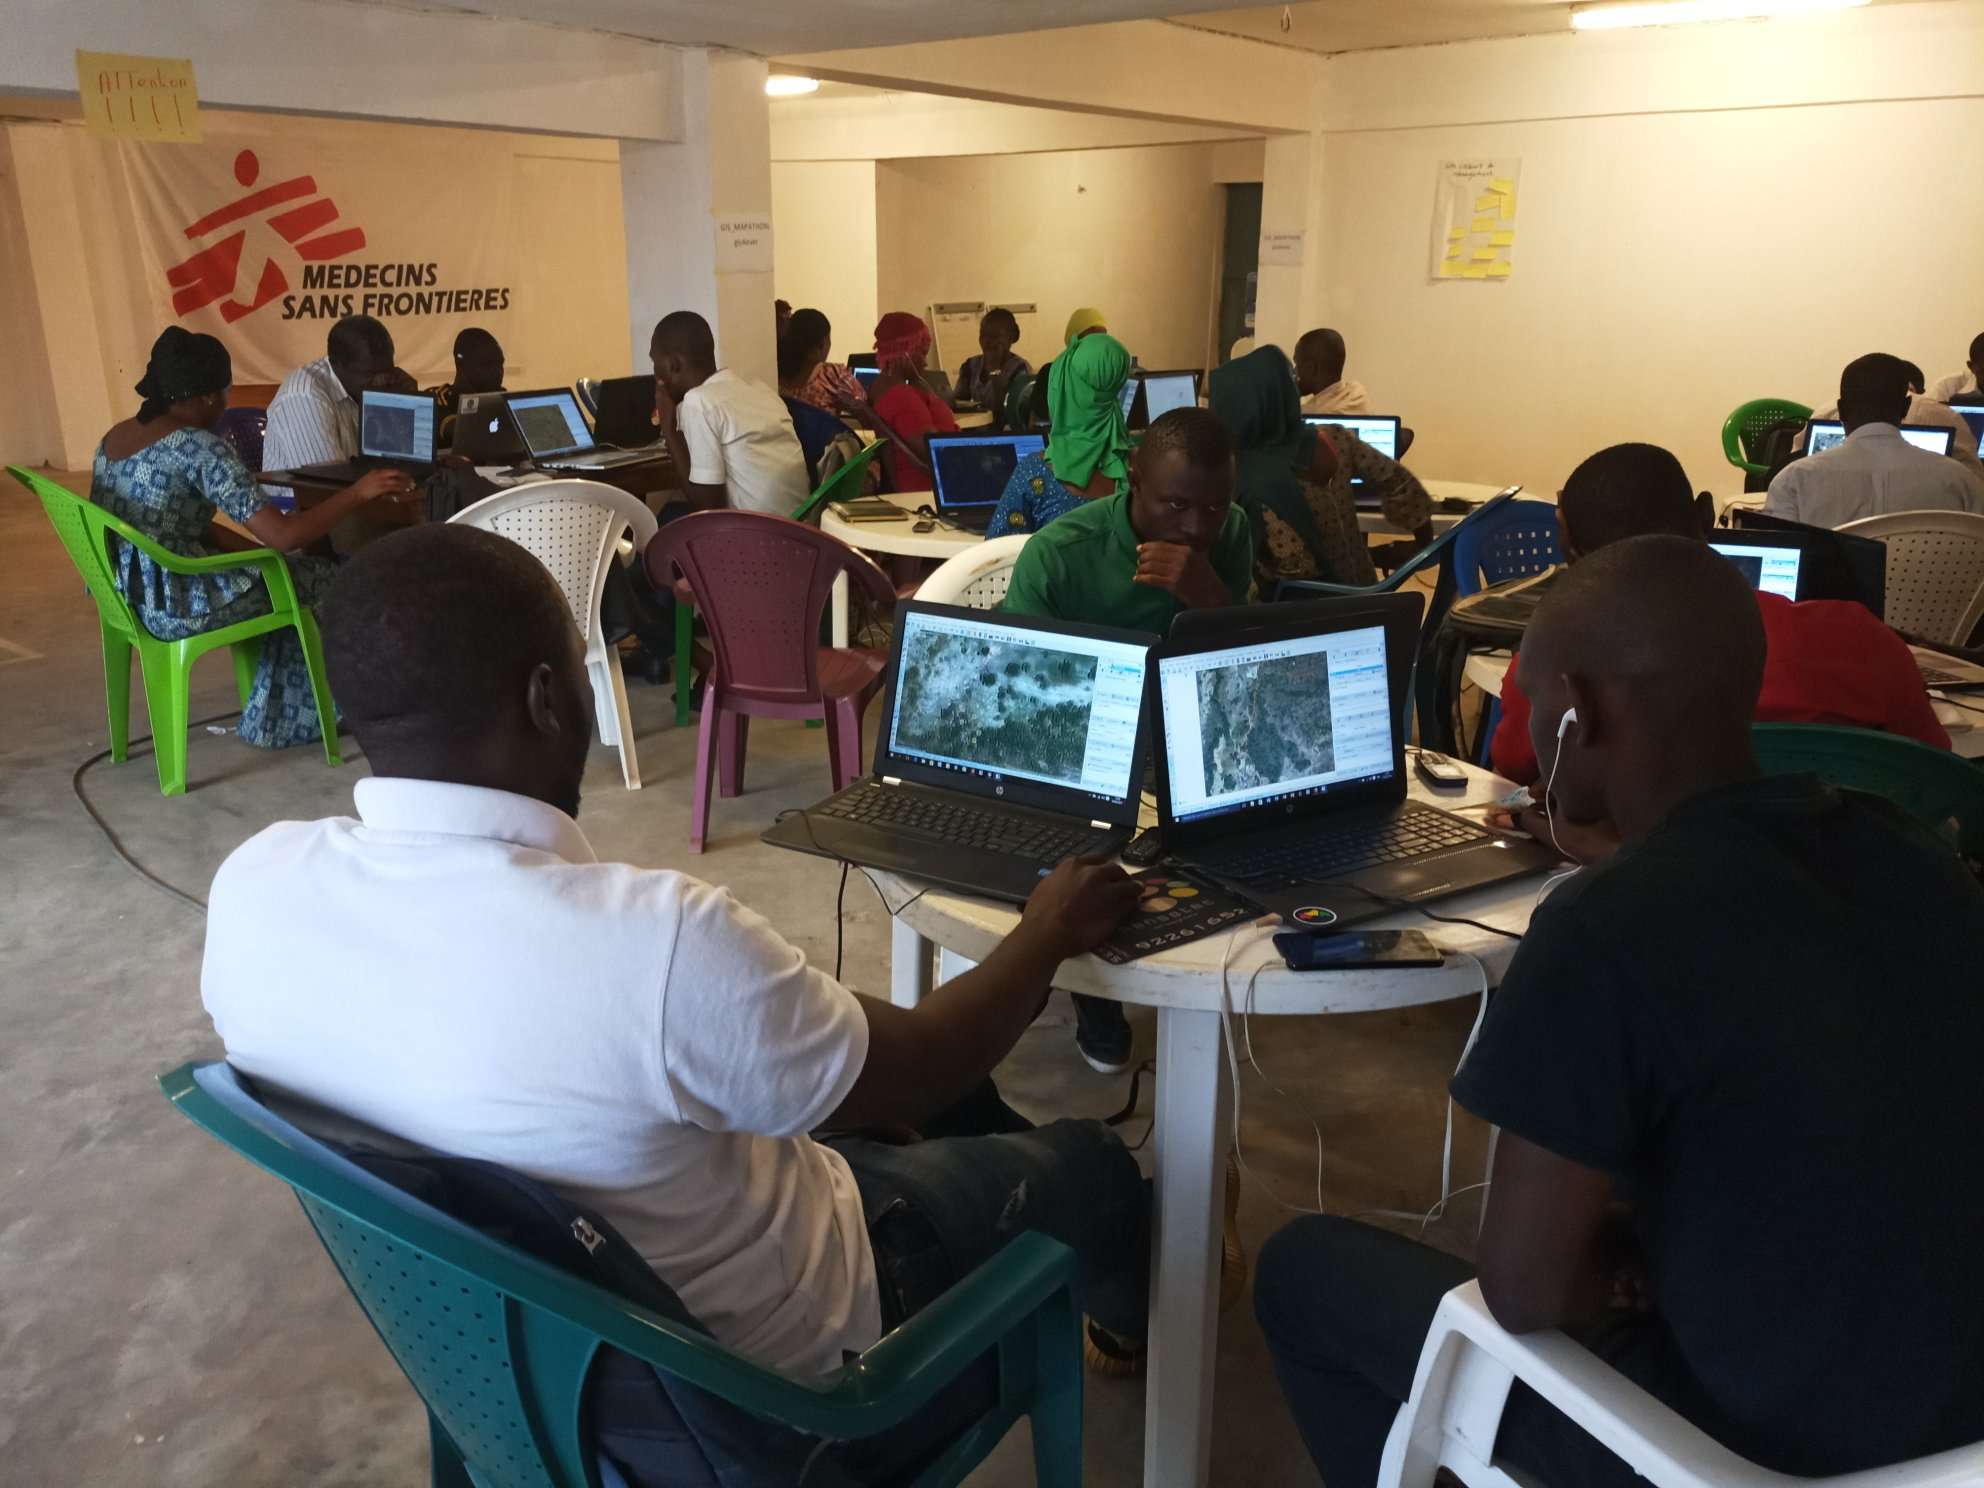 A Missing Maps mapathon taking place in Guinea.